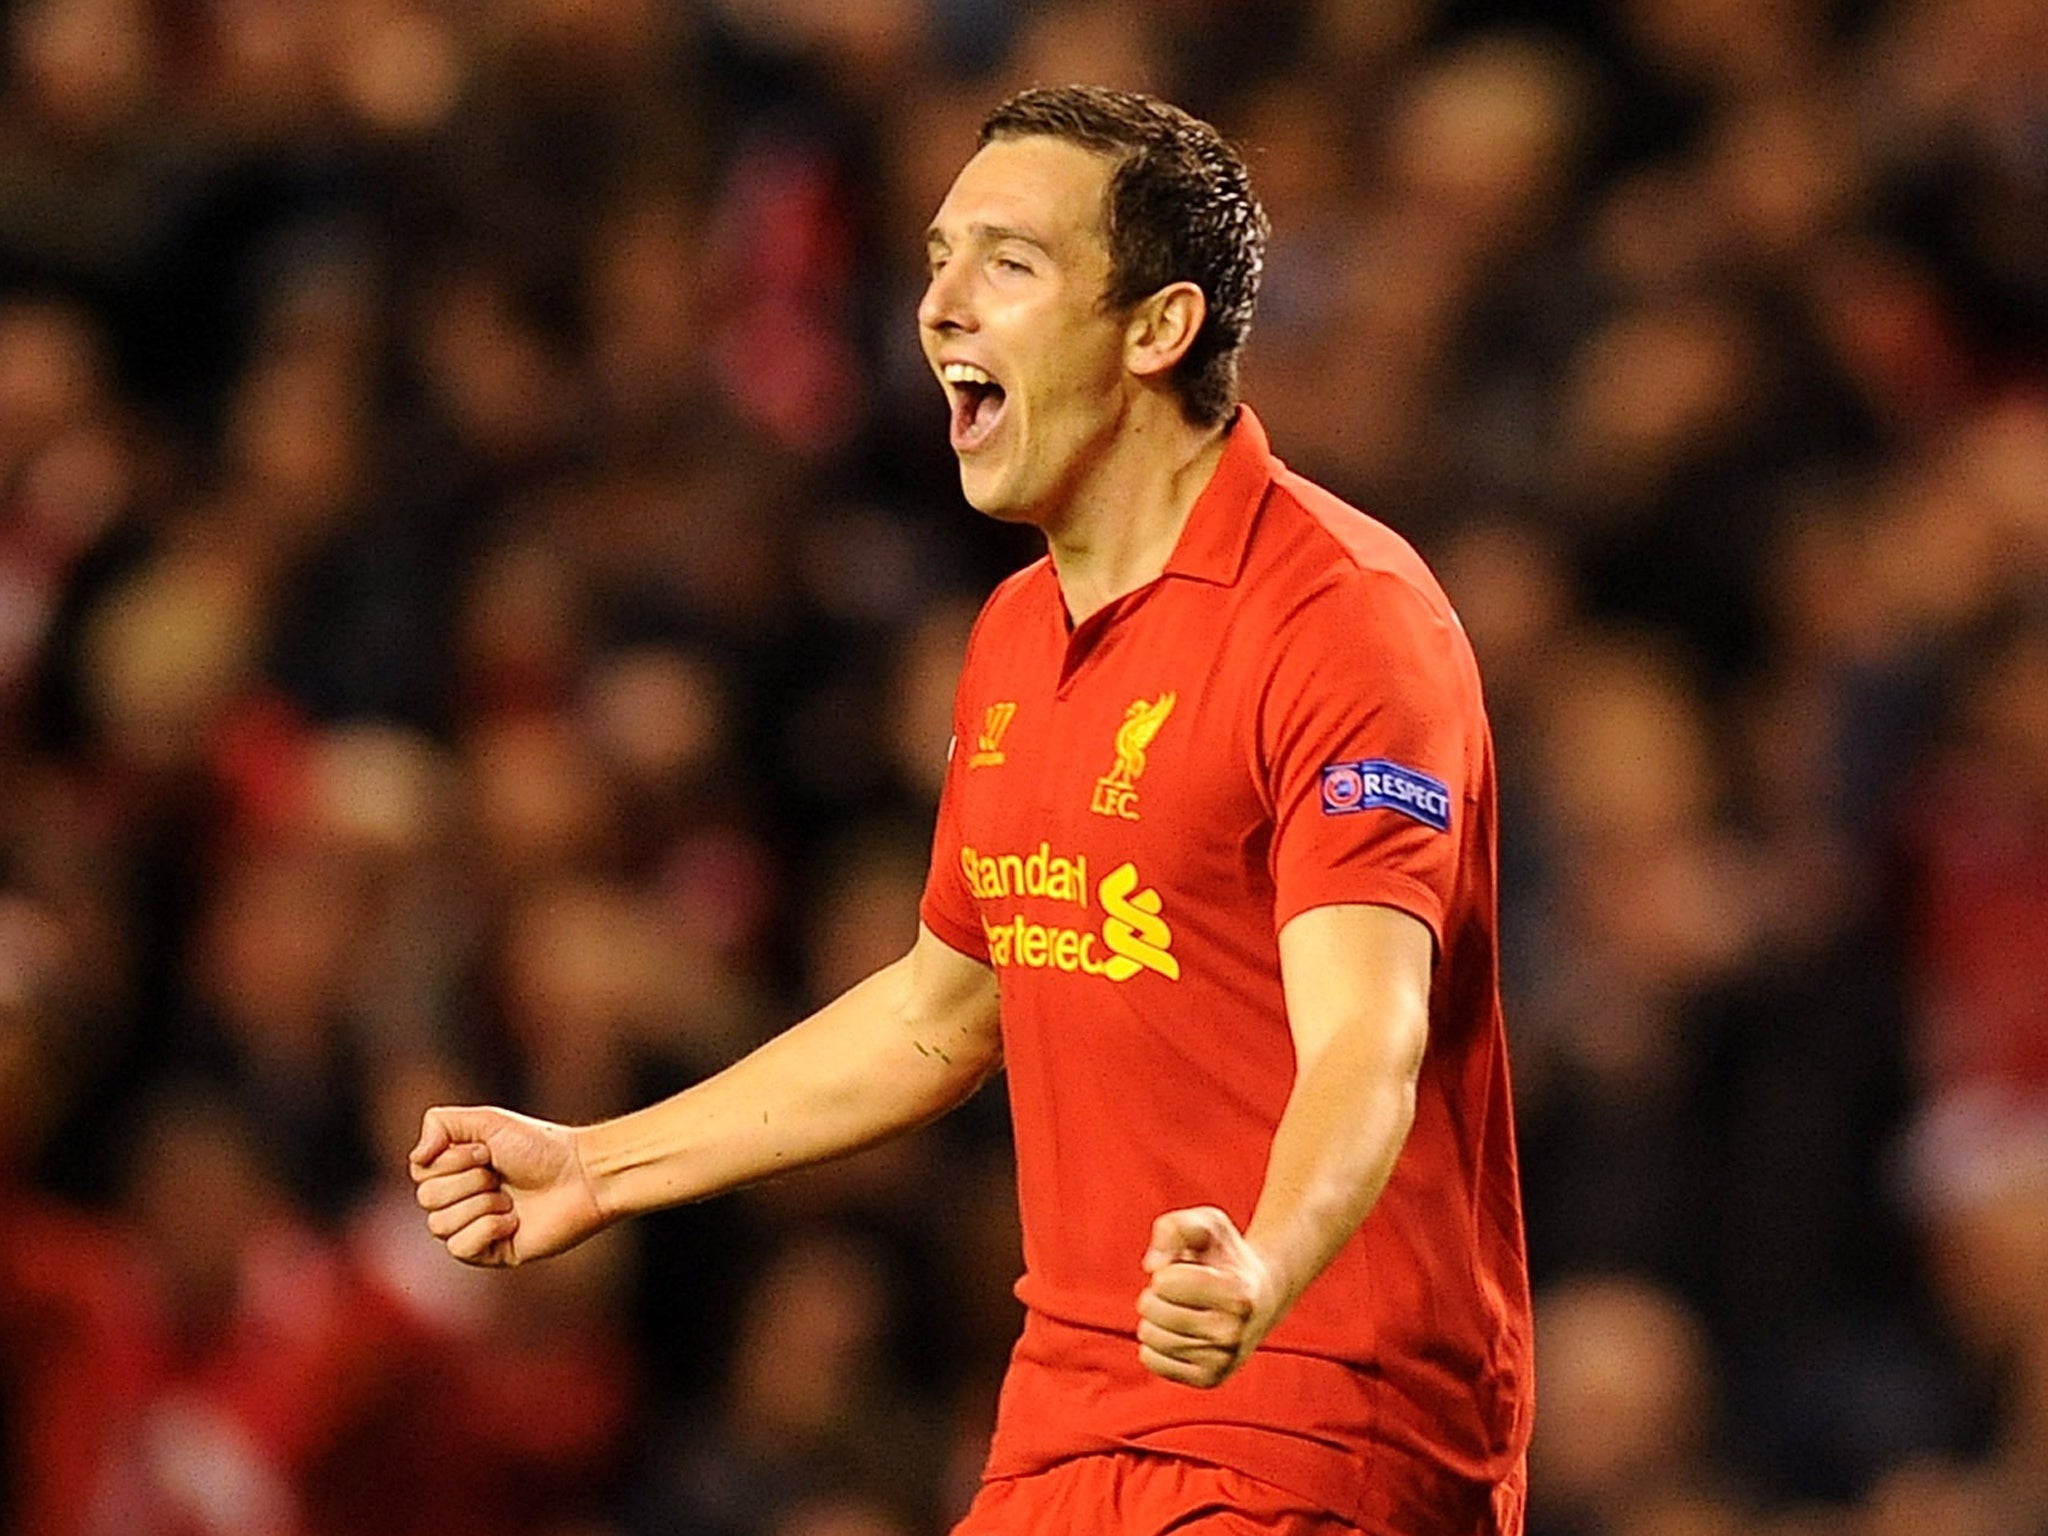 Downing has managed 14 senior appearances this season, mostly in Europe